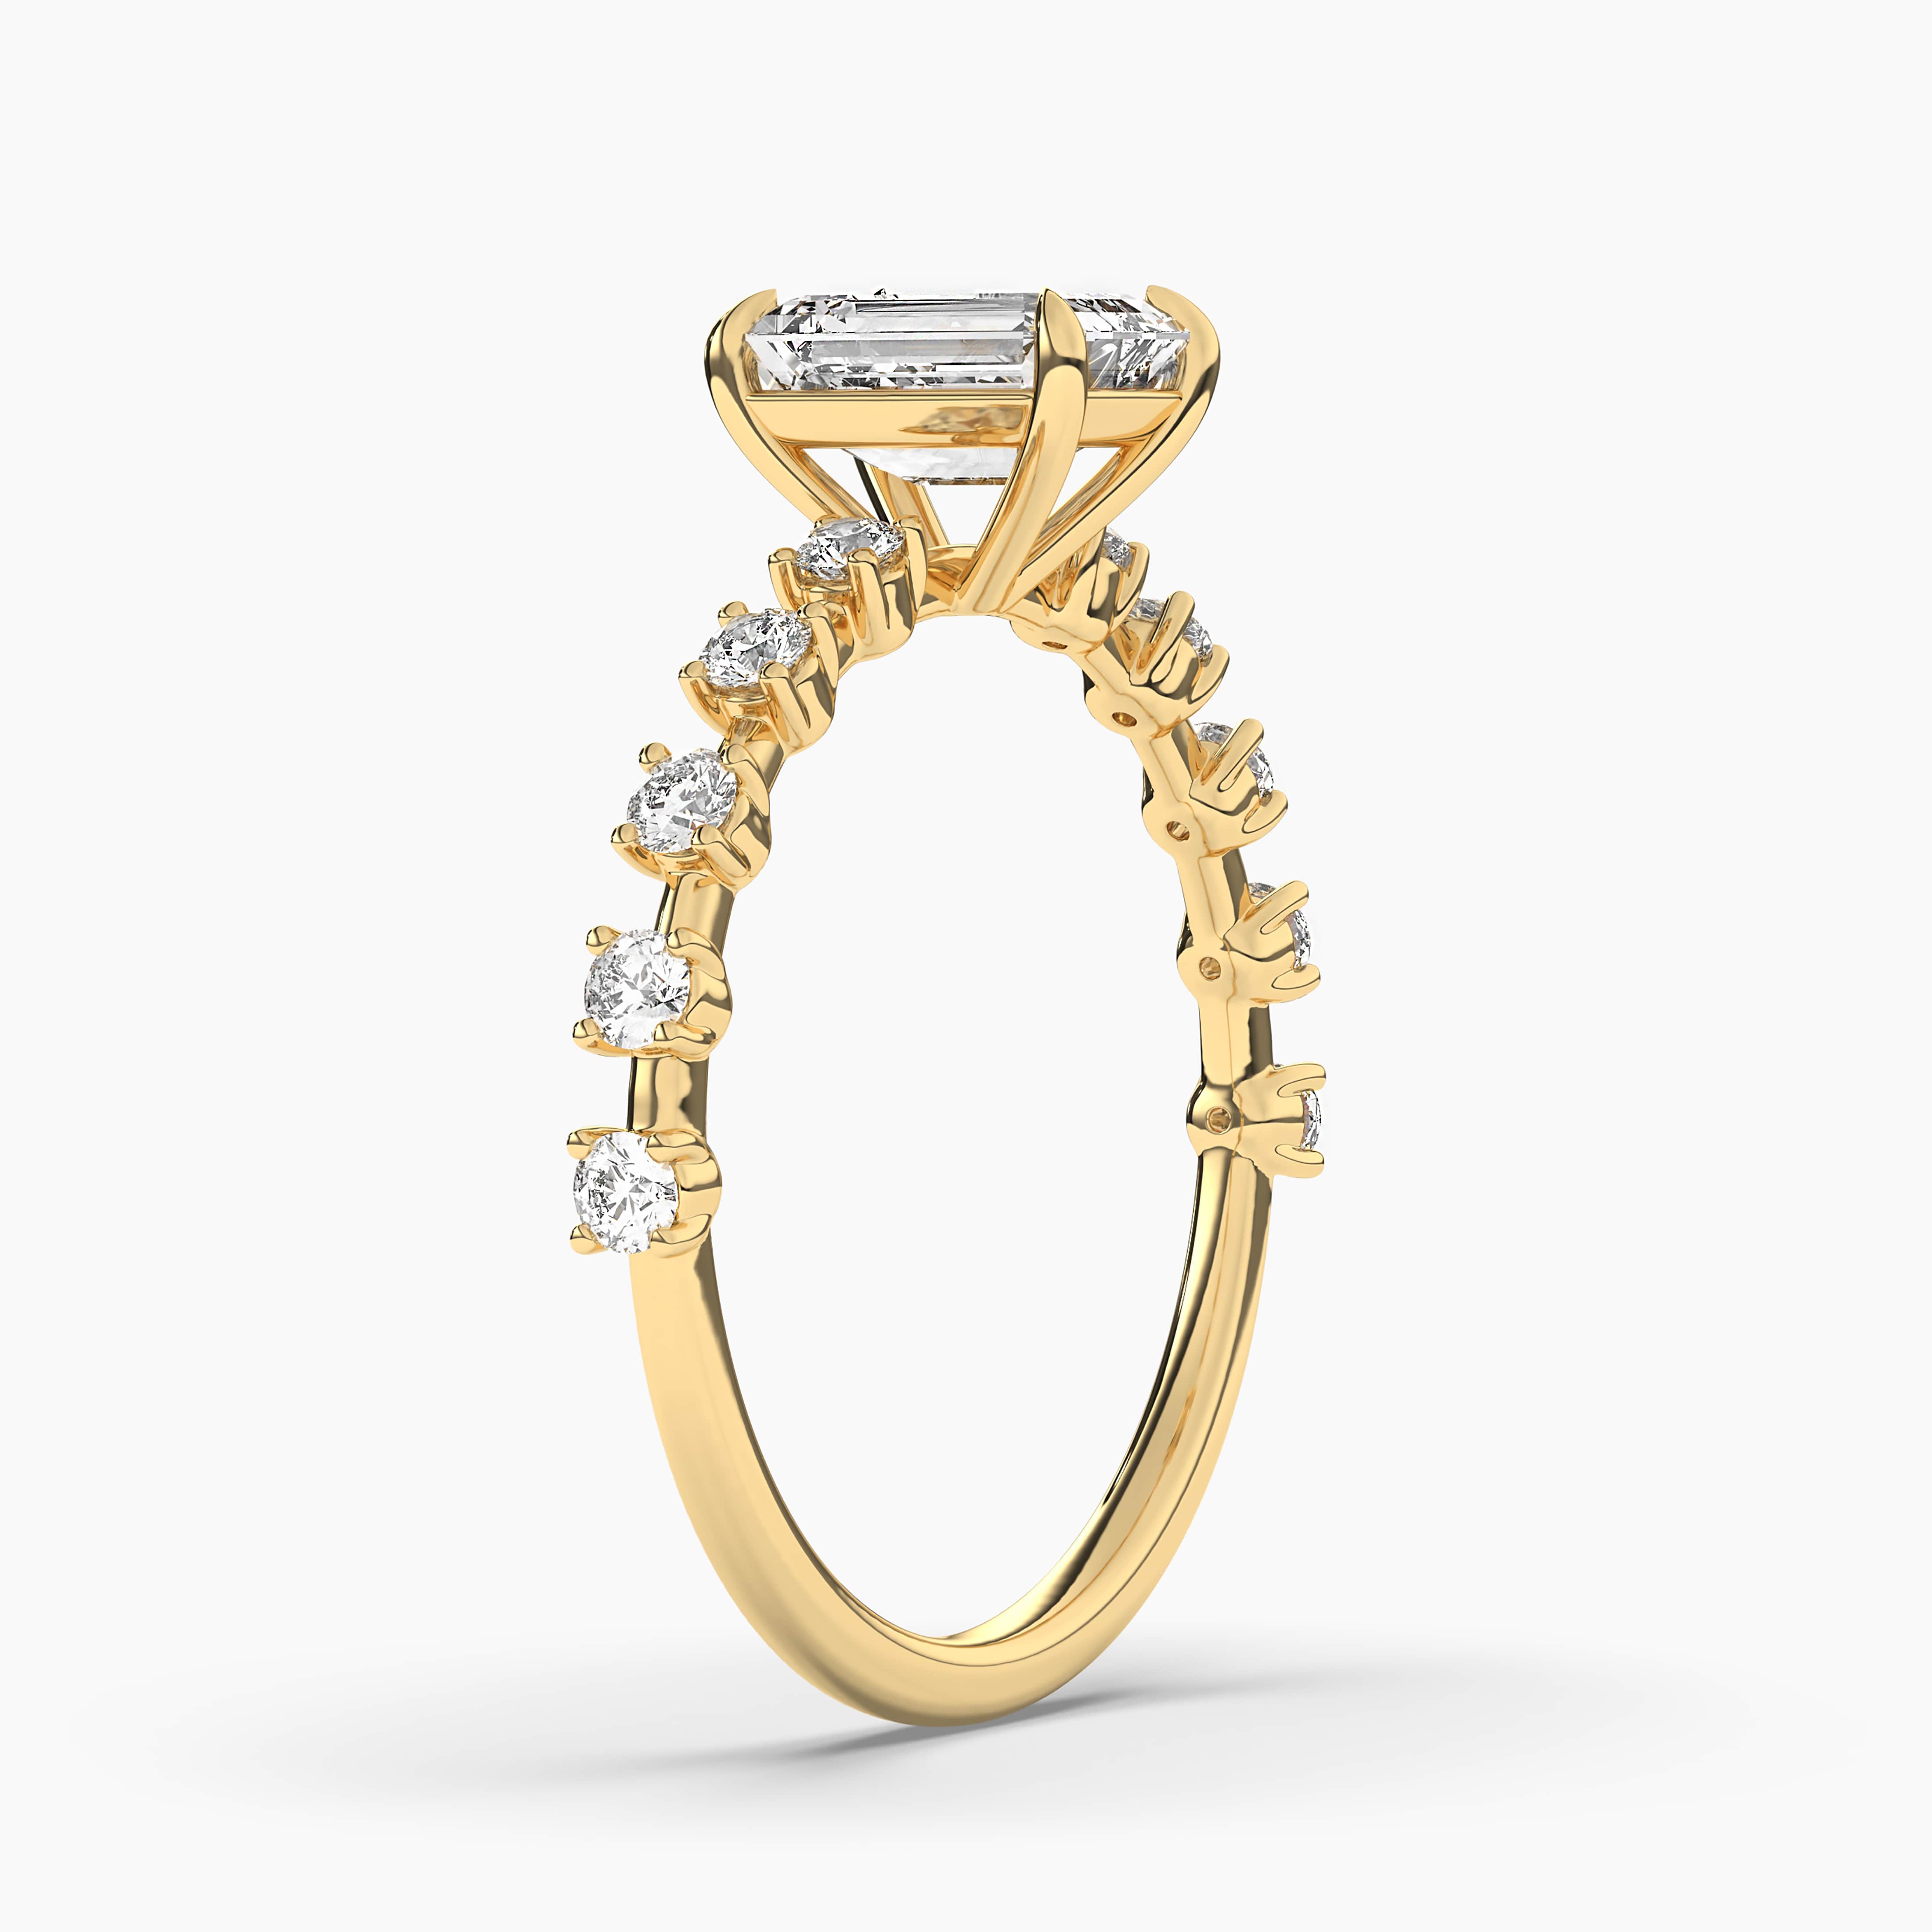 Emerald Cut Blue Sapphire and Round Diamond Ring in Yellow Gold